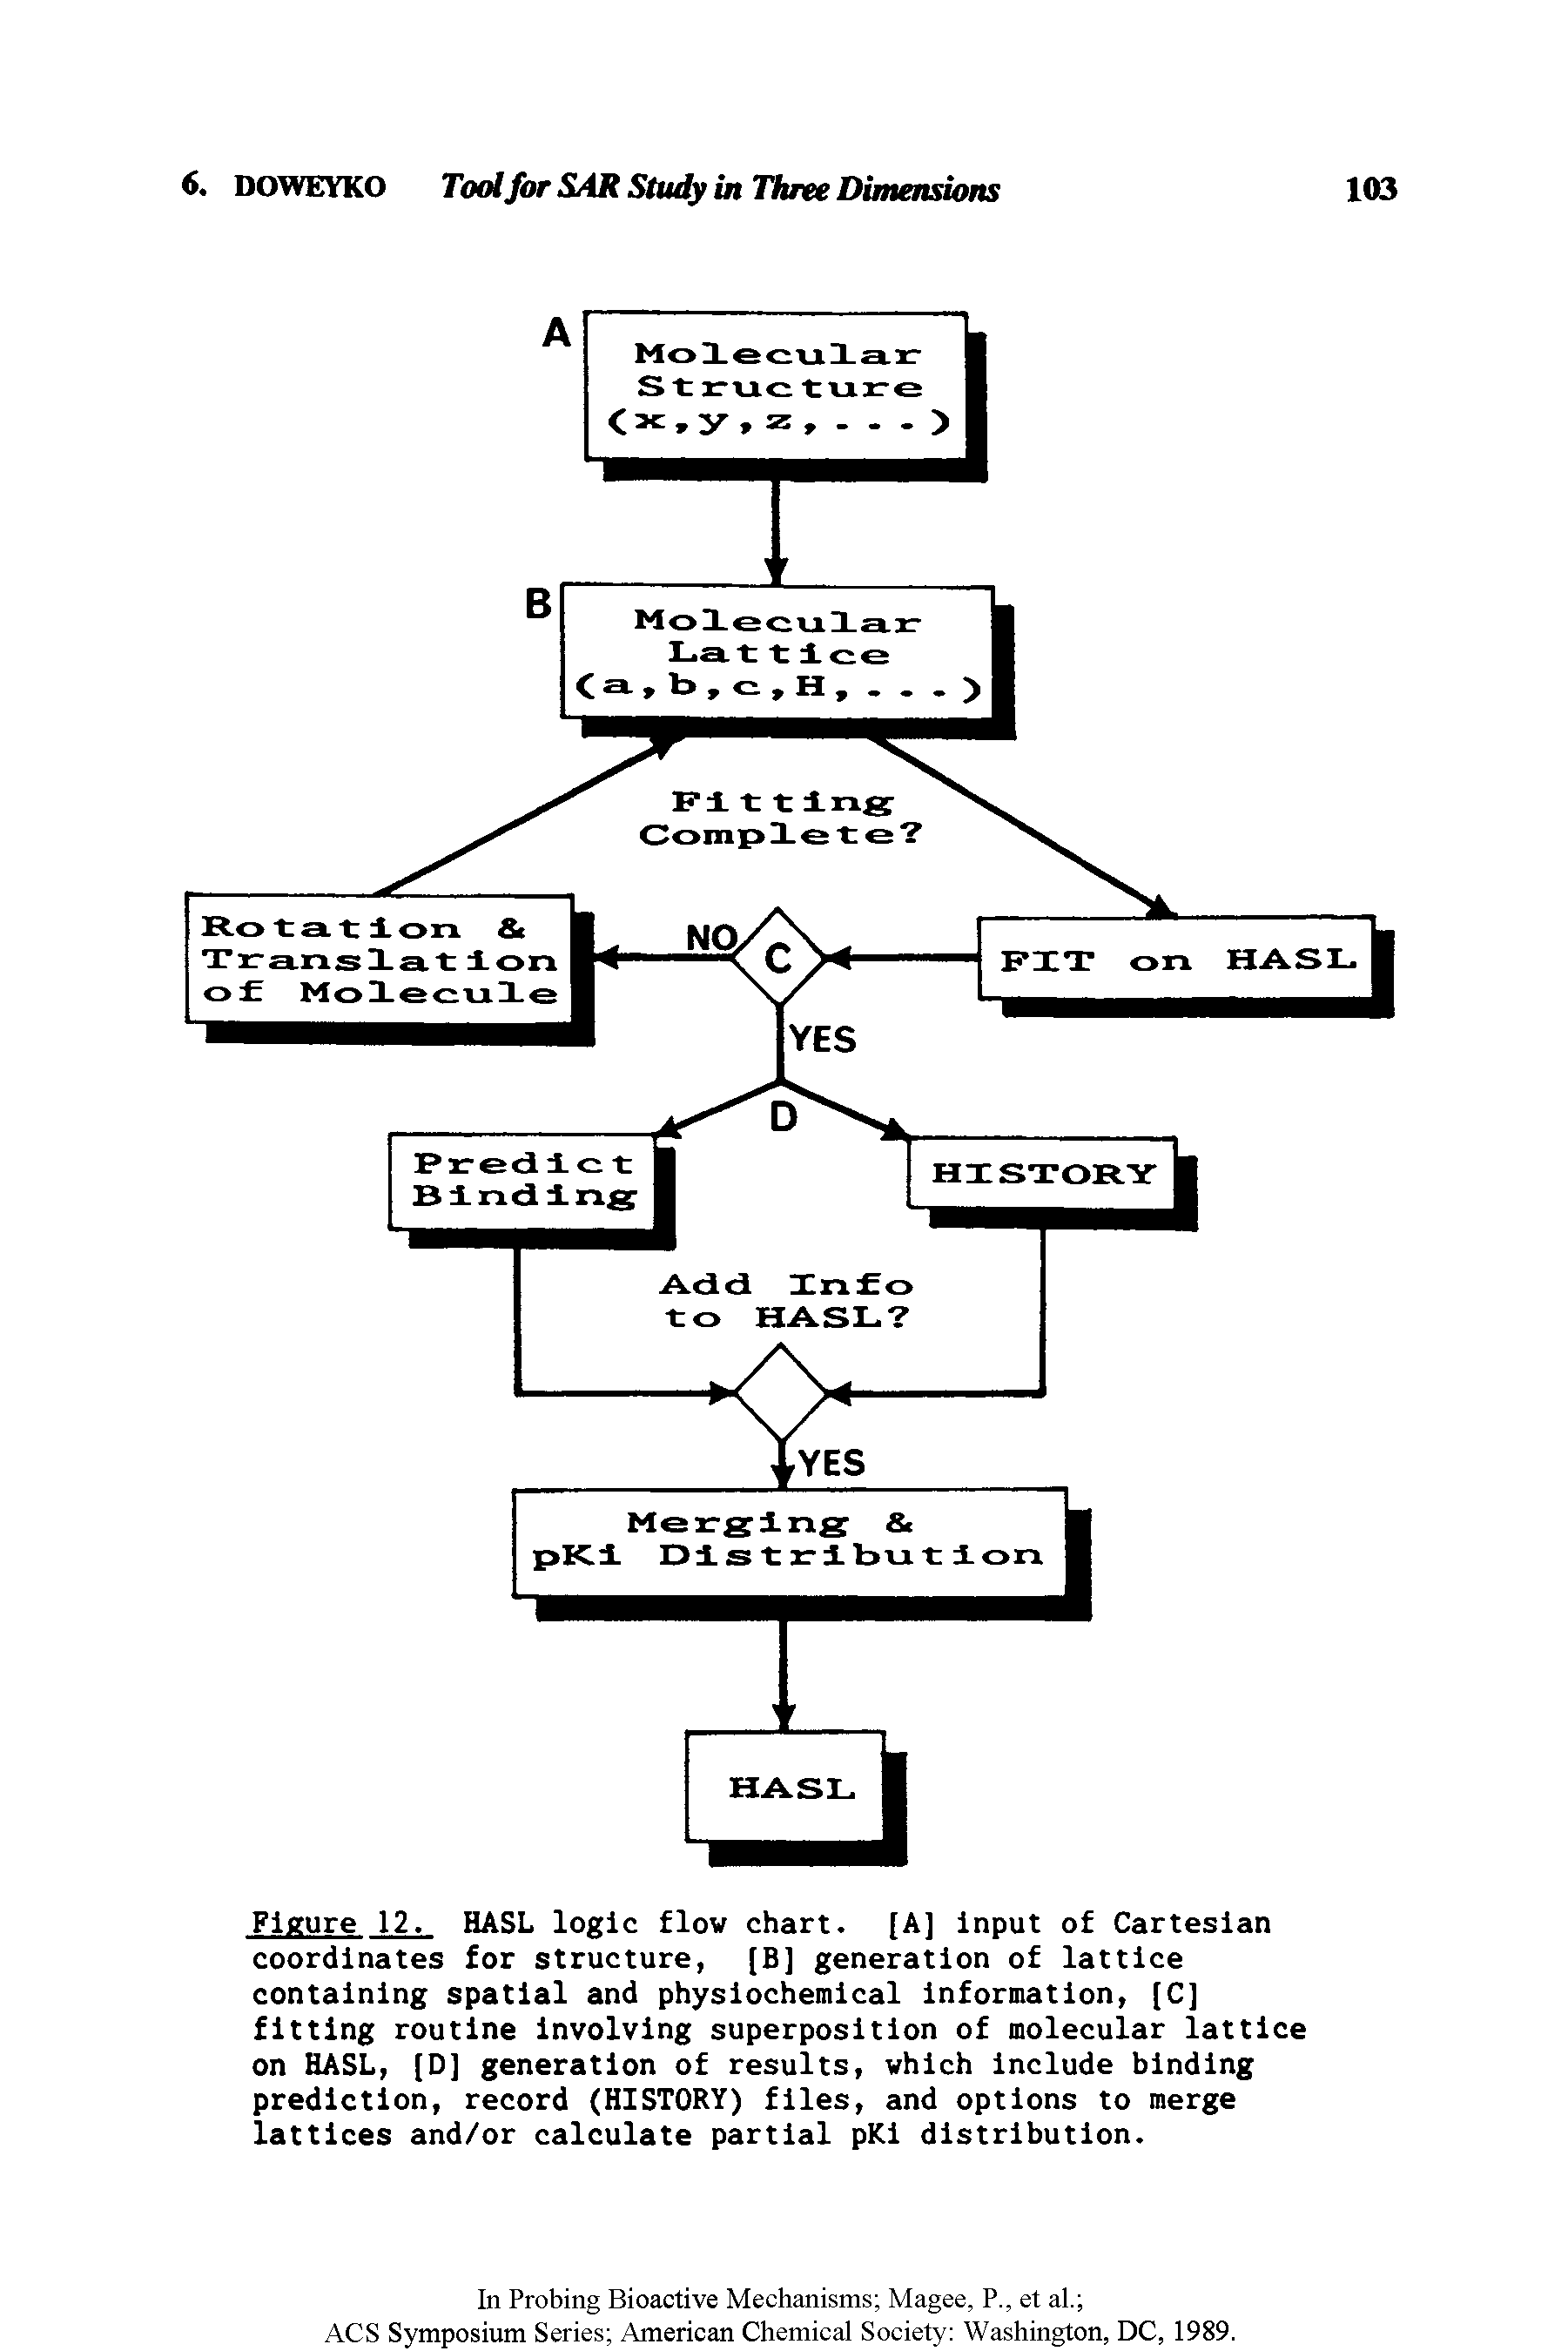 Figure 12. HASL logic flow chart. [A] input of Cartesian coordinates for structure, [B] generation of lattice containing spatial and physlochemlcal information, [C] fitting routine Involving superposition of molecular lattice on HASL, [D] generation of results, which Include binding prediction, record (HISTORY) files, and options to merge lattices and/or calculate partial pKl distribution.